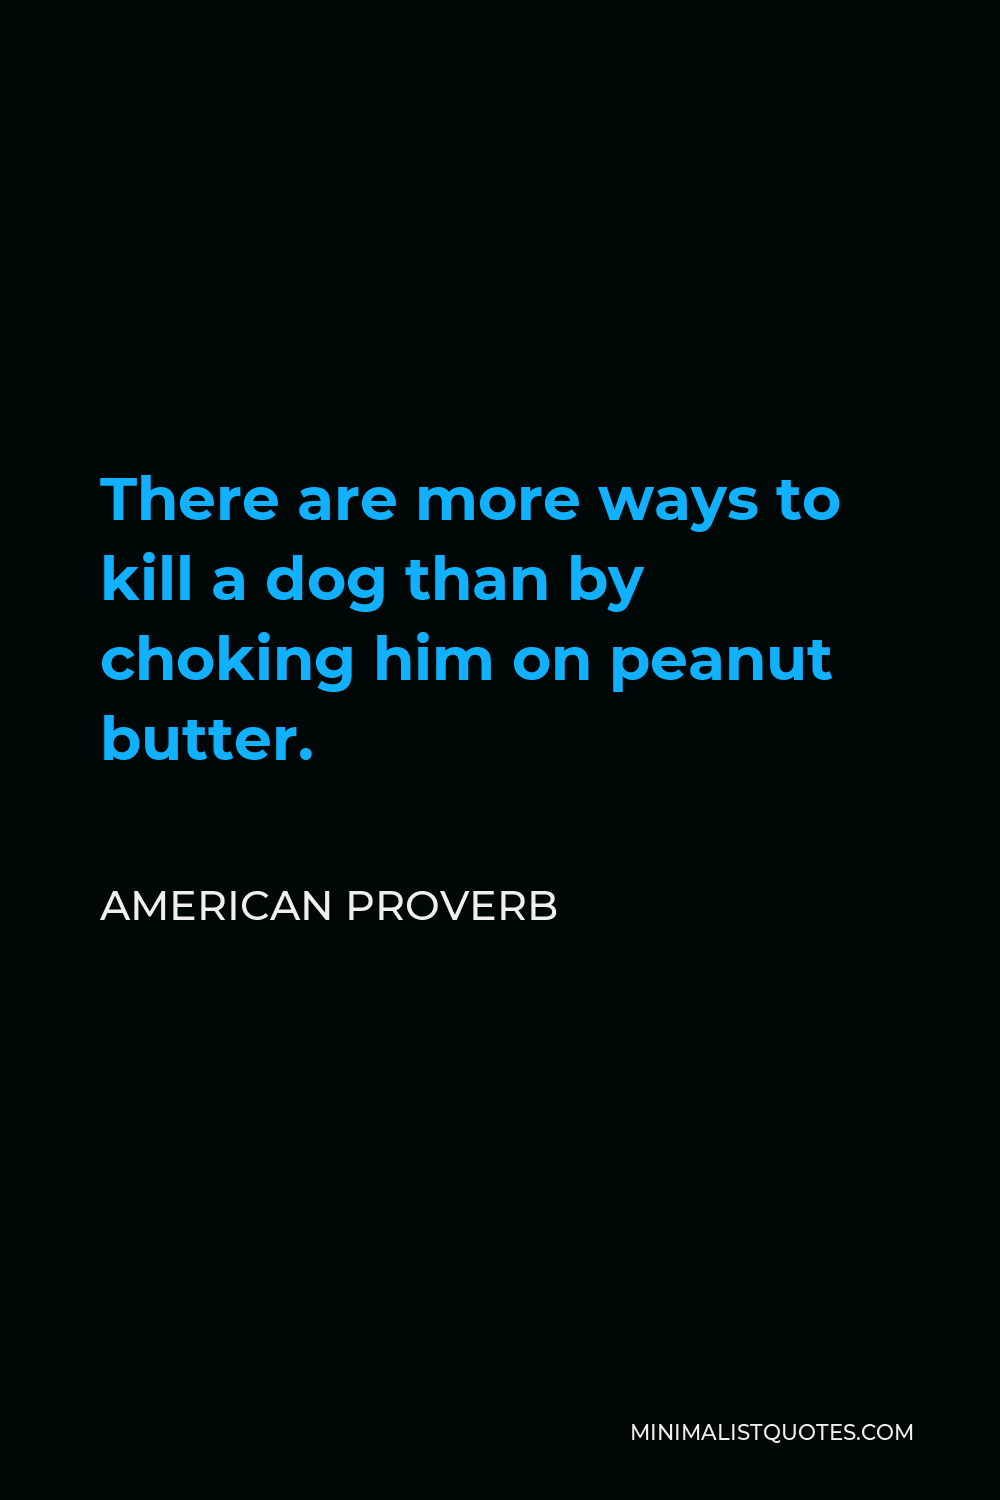 American Proverb Quote - There are more ways to kill a dog than by choking him on peanut butter.